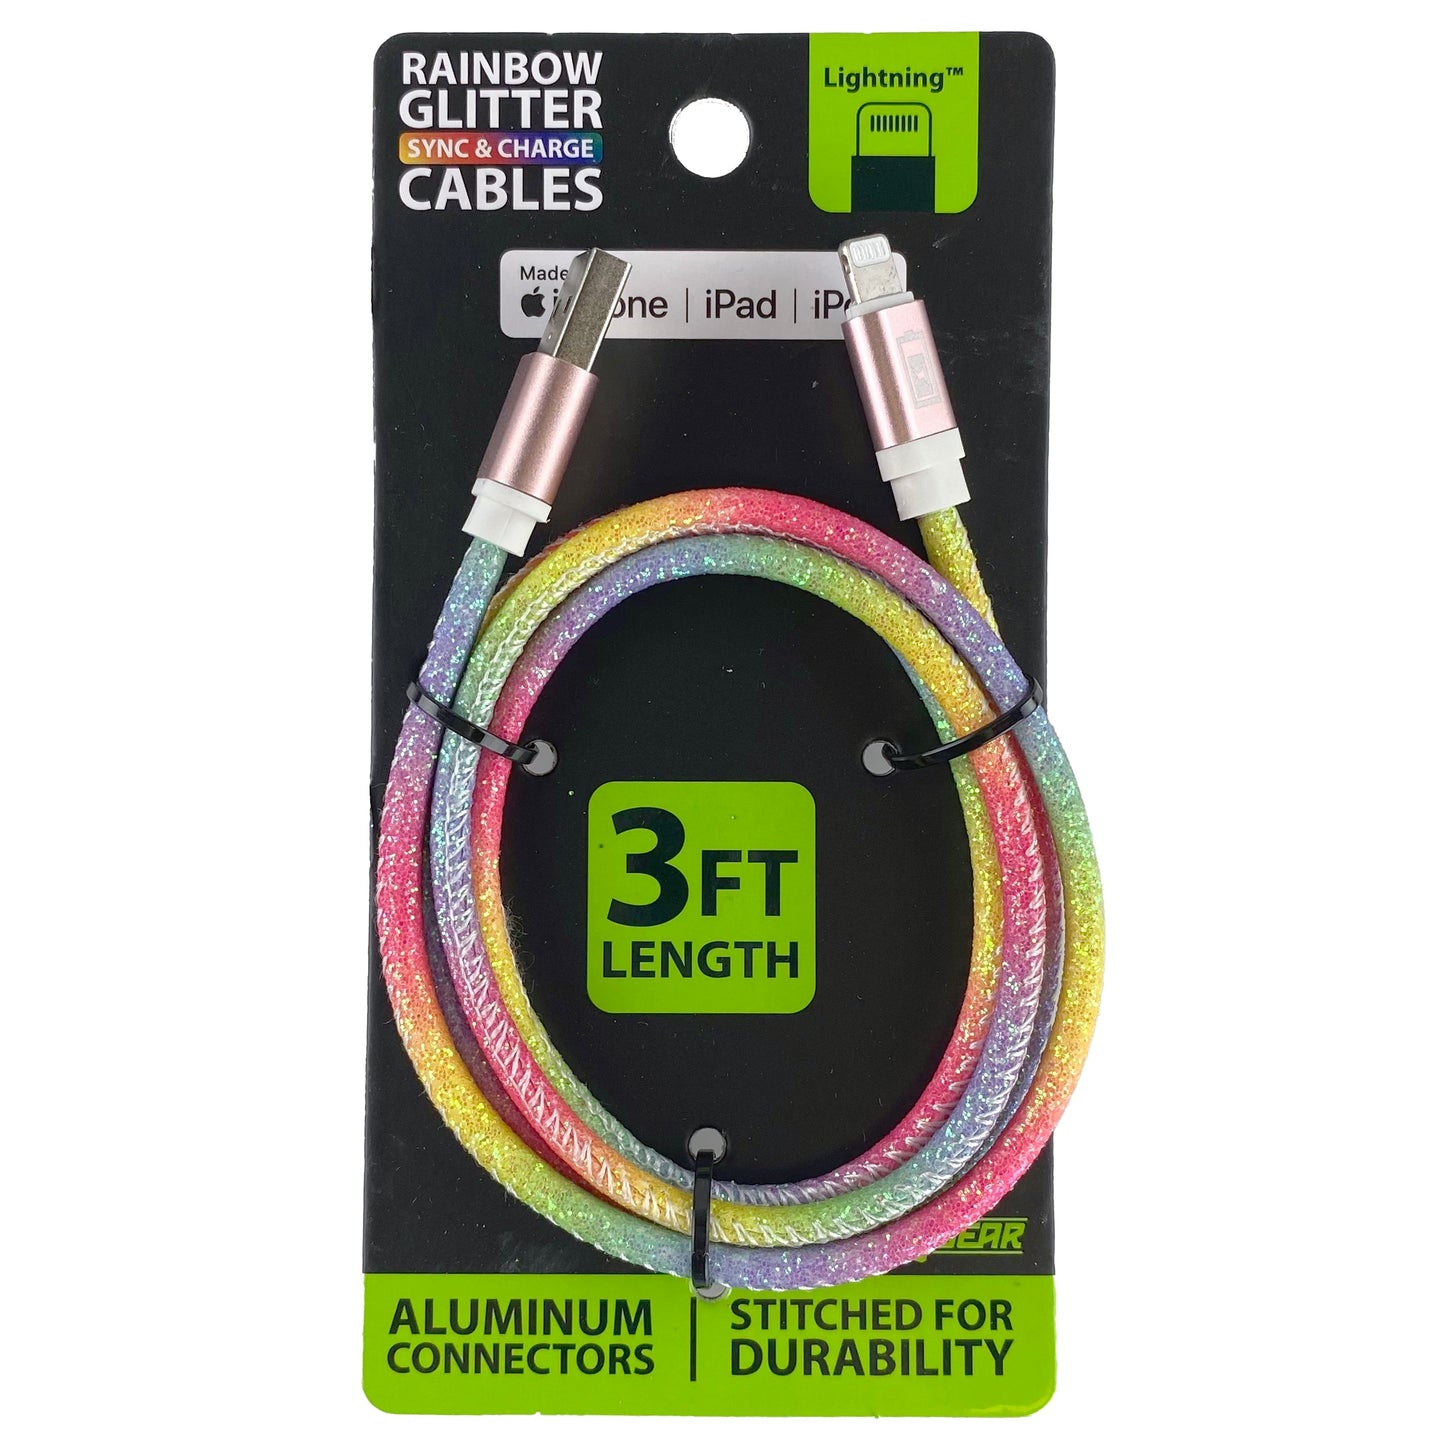 ITEM NUMBER 041317 3FT RAINBOW GLITTER USB-TO-LIGHTNING CABLE 20 PIECES PER PACK